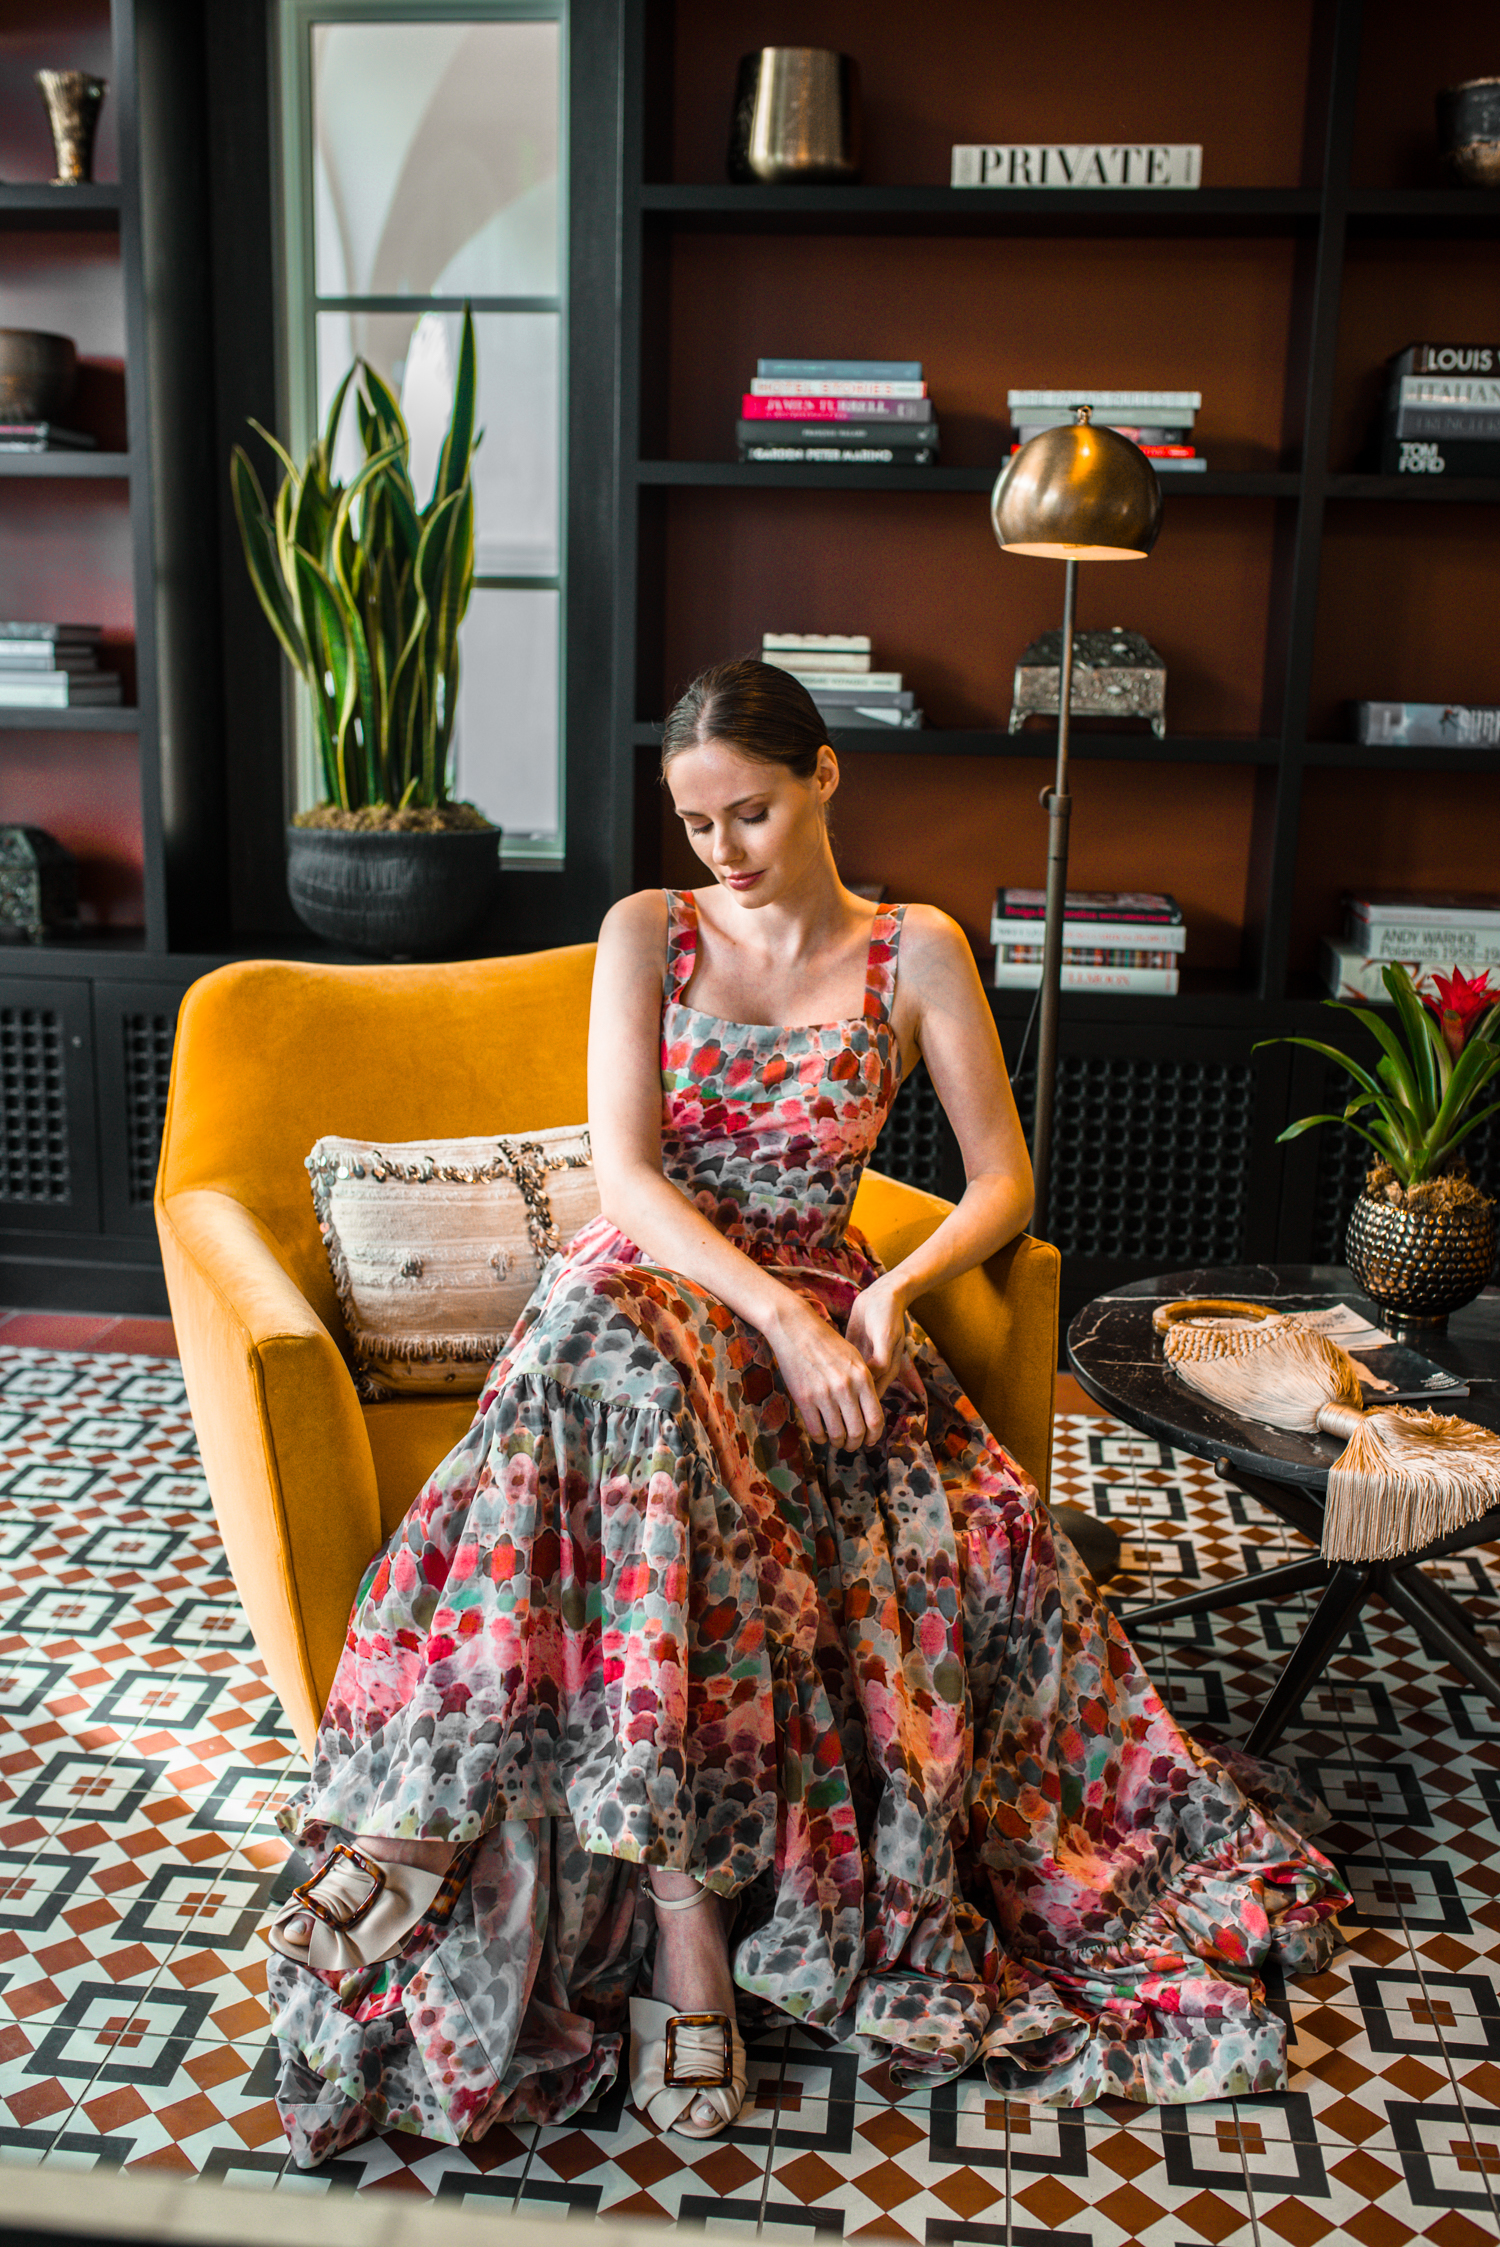 Alyssa Campanella of The A List blog visits Hotel Californian in Santa Barbara with Torrance Coombs wearing Alexis Galia dress for an anniversary trip.